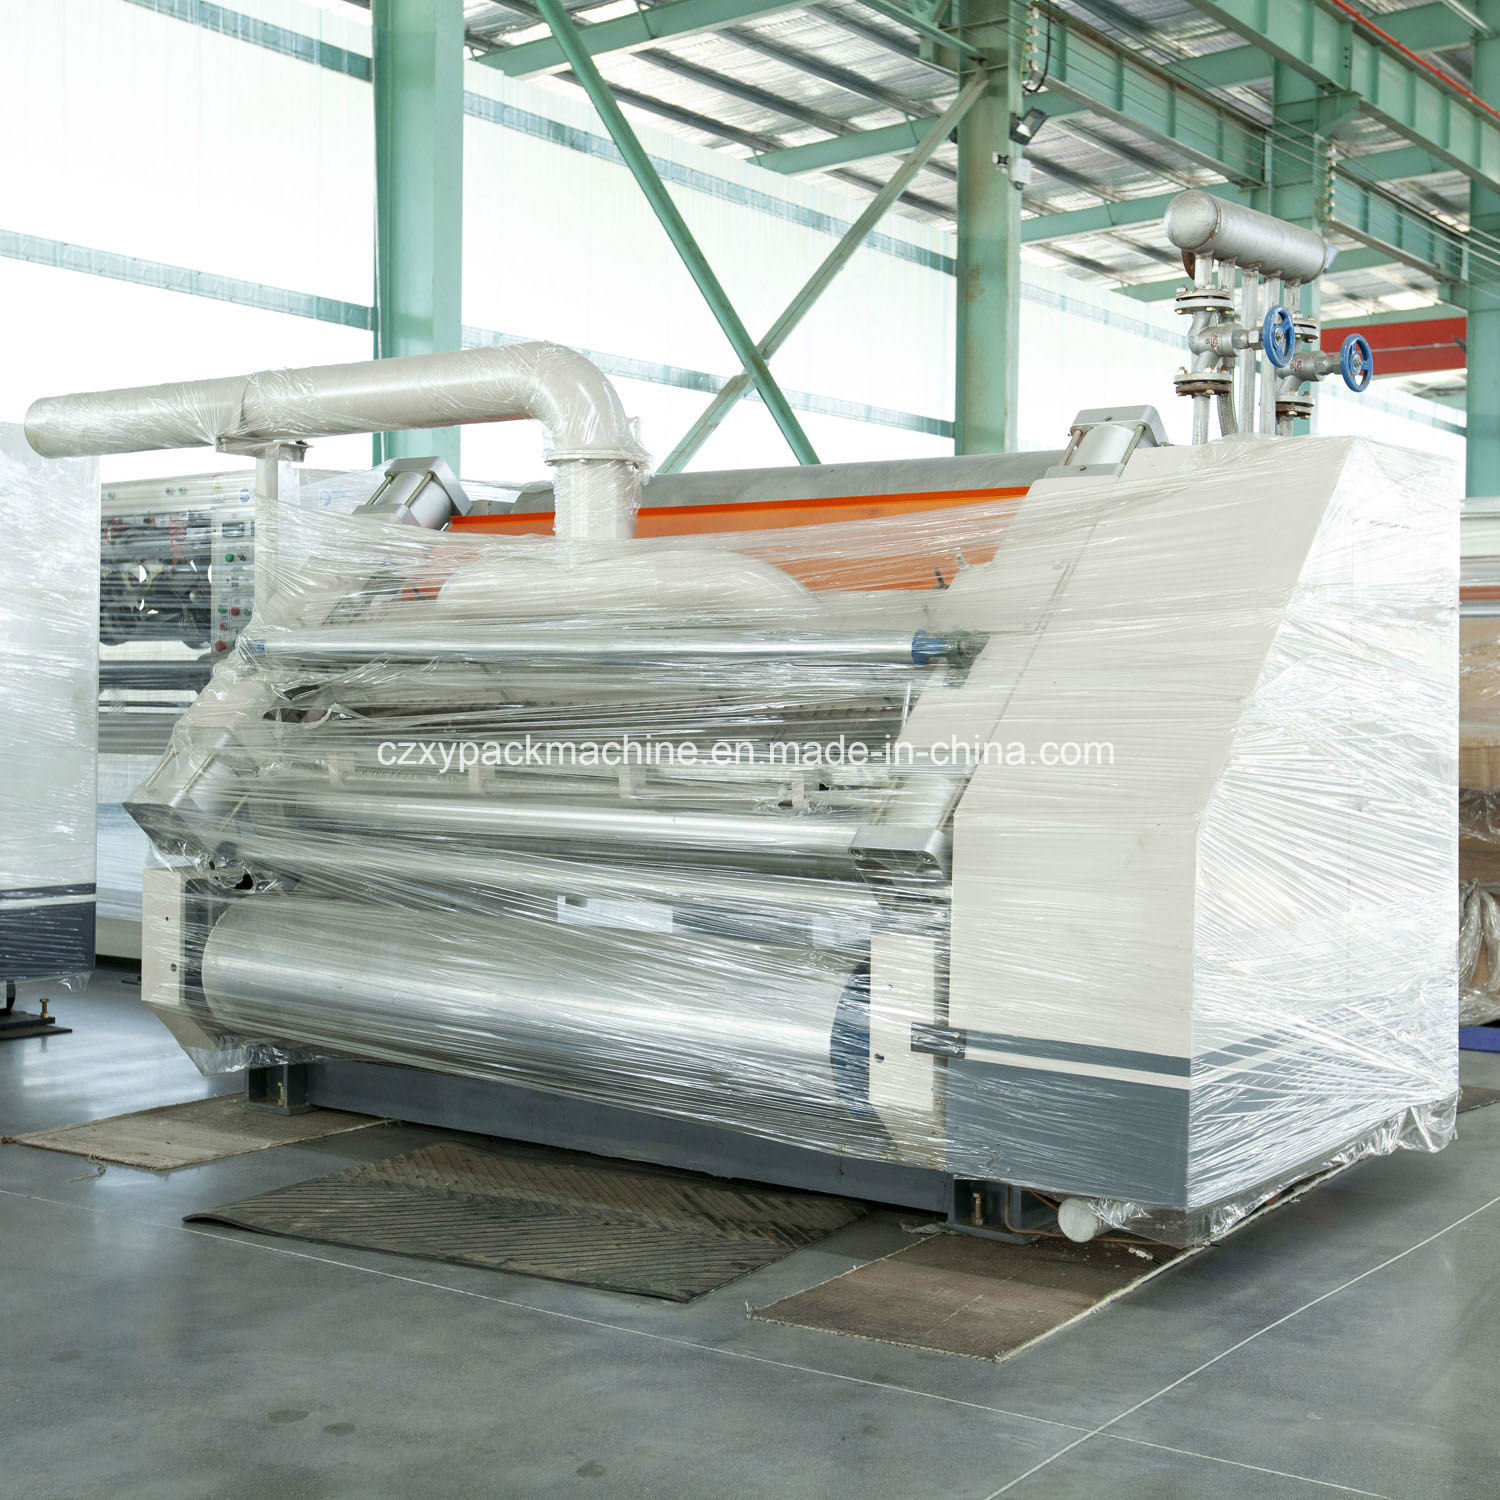 High Speed Full Automatic Corrugated Cardboard Production Line